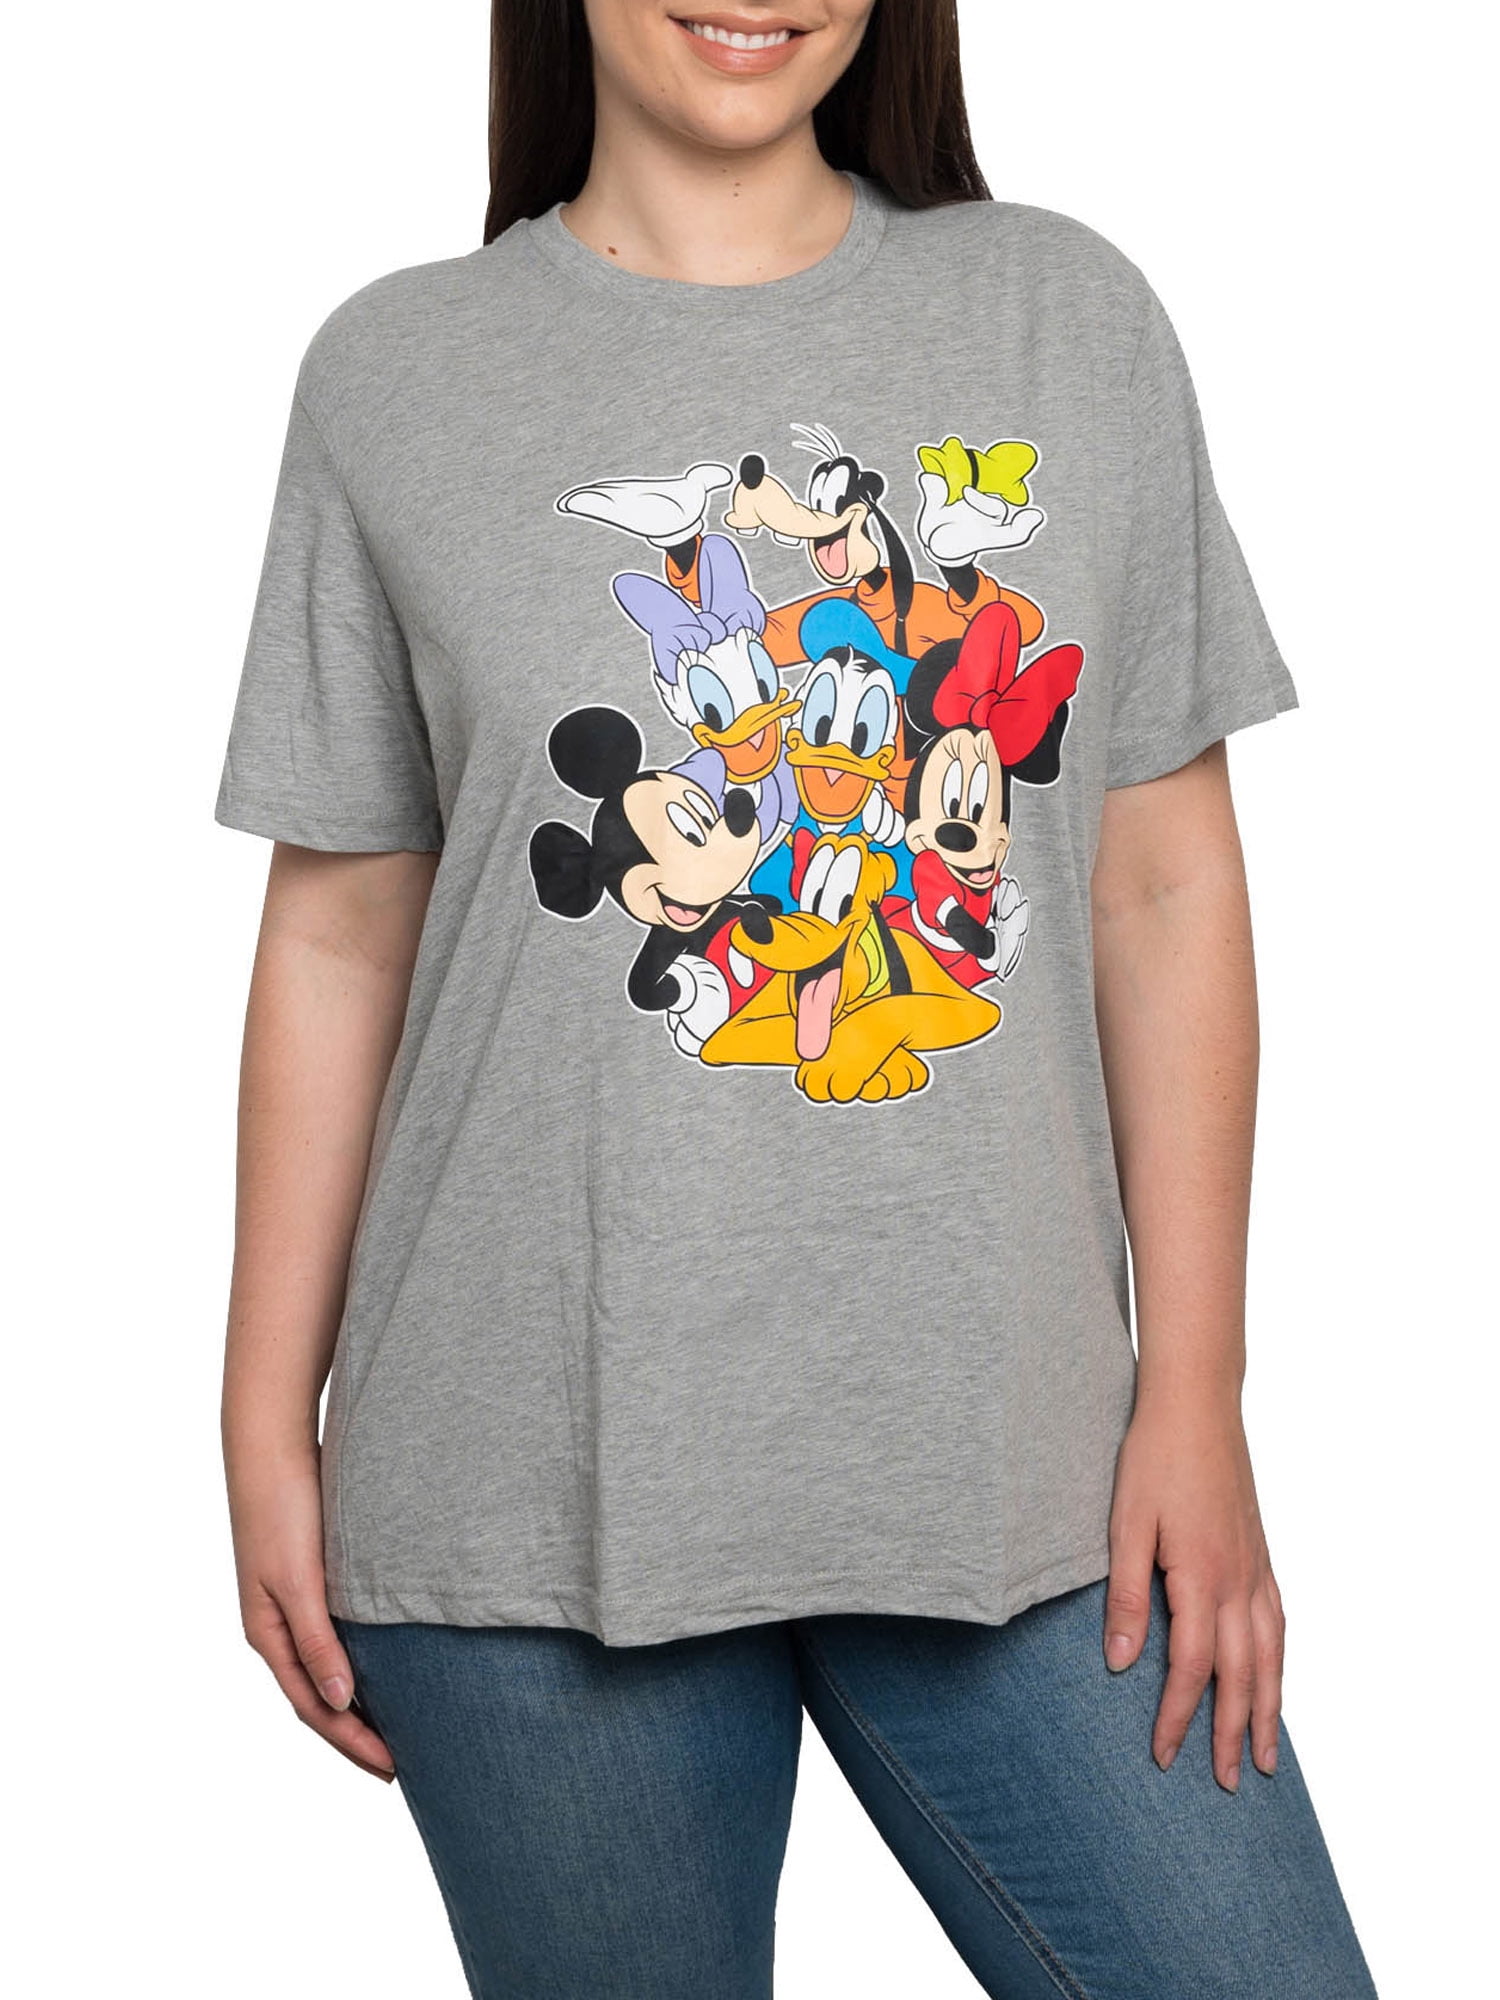 Mickey mouse daisy sticker sticker or transfer textile clothing tshirt 